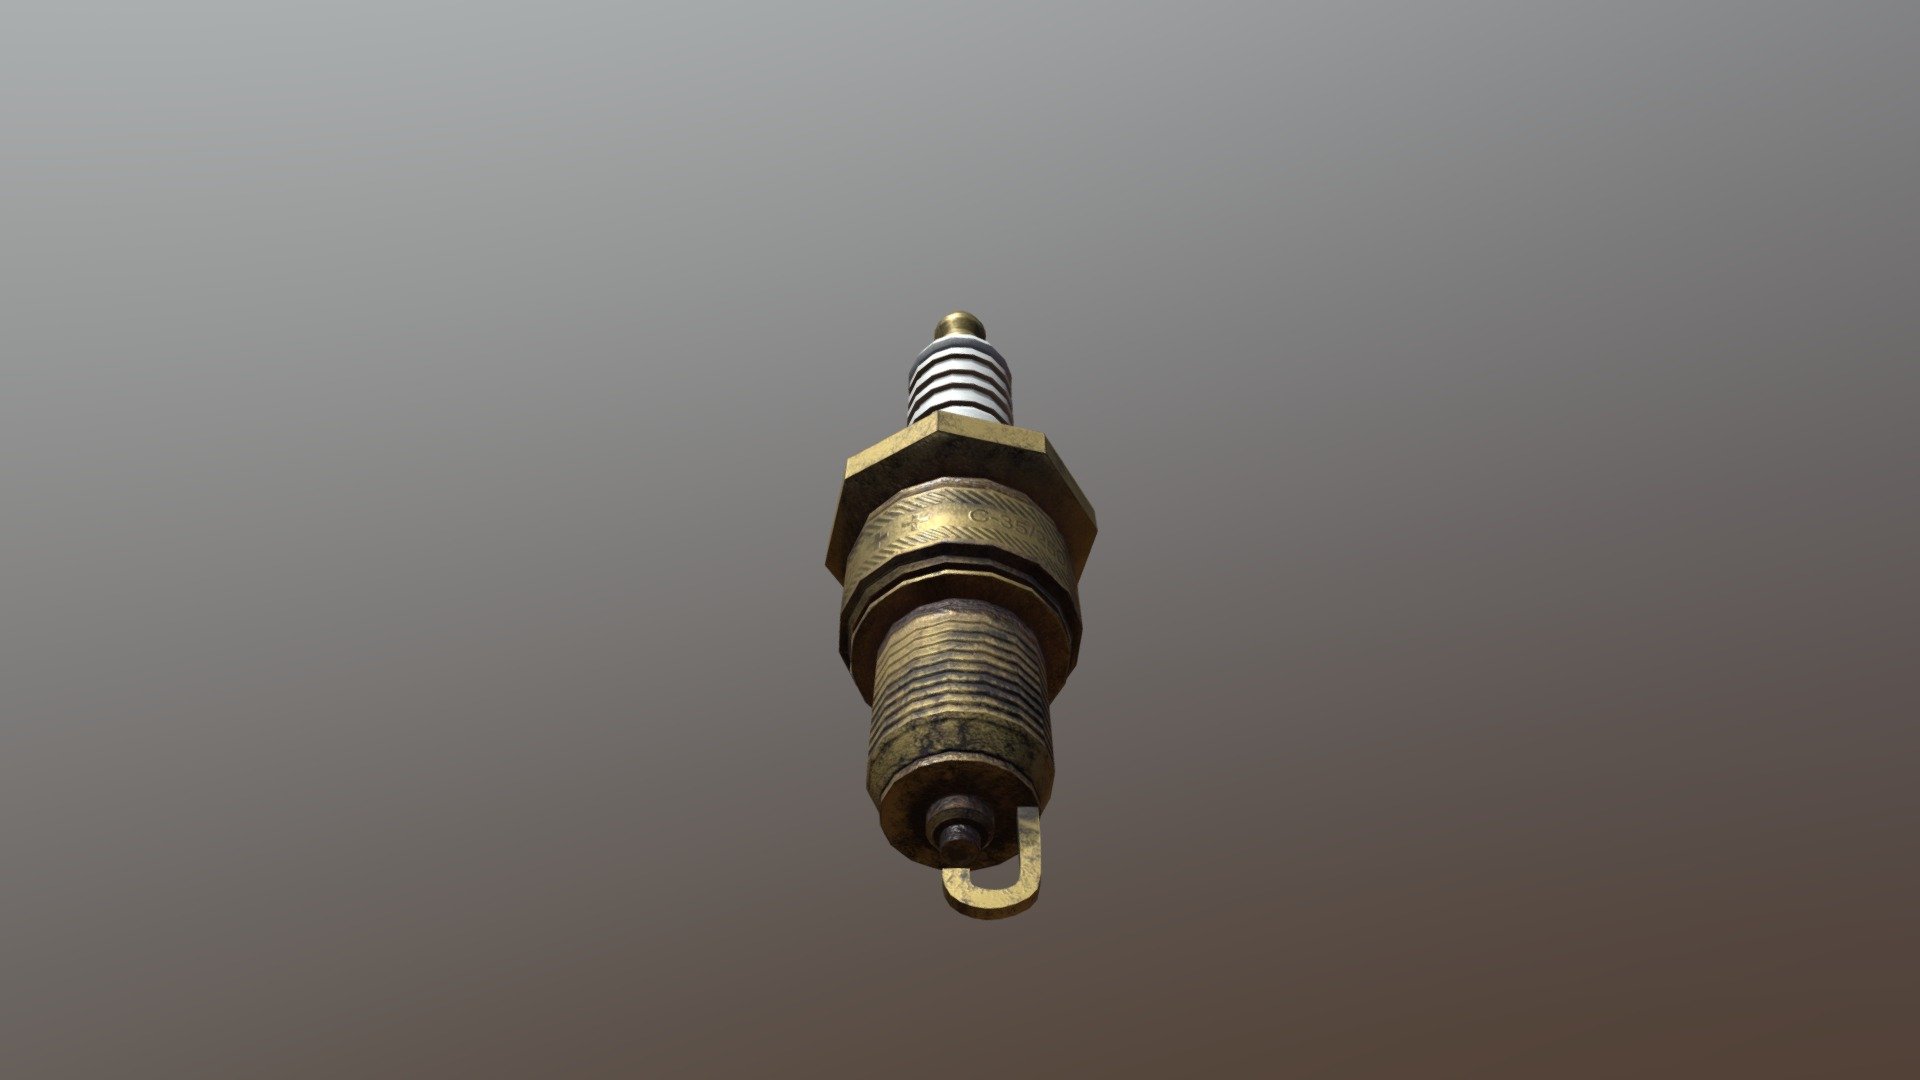 I made this spark plug in Autodesk Maya software and have textured the same in Substance Painter for some regular practice work 3d model